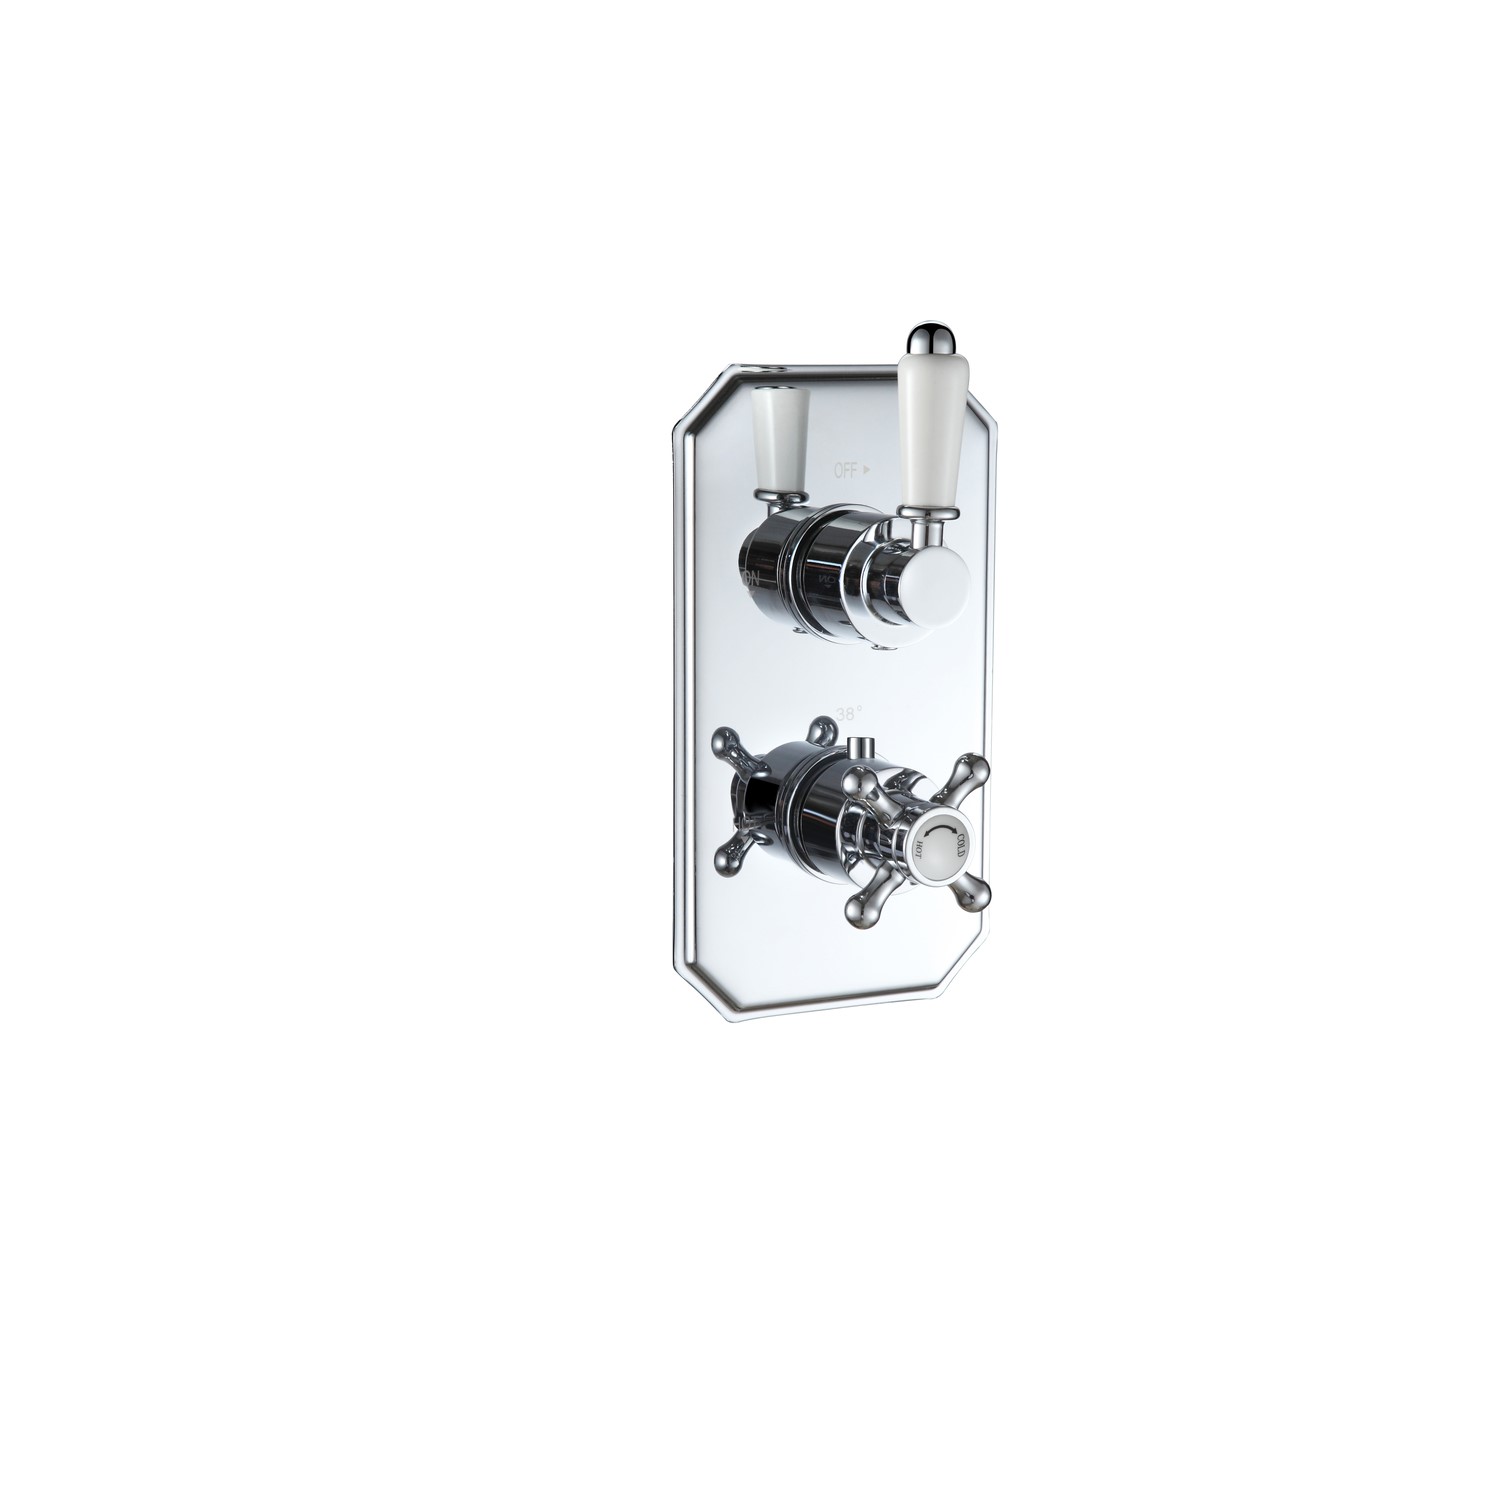 Cambridge traditional twin shower valve - 1 outlet